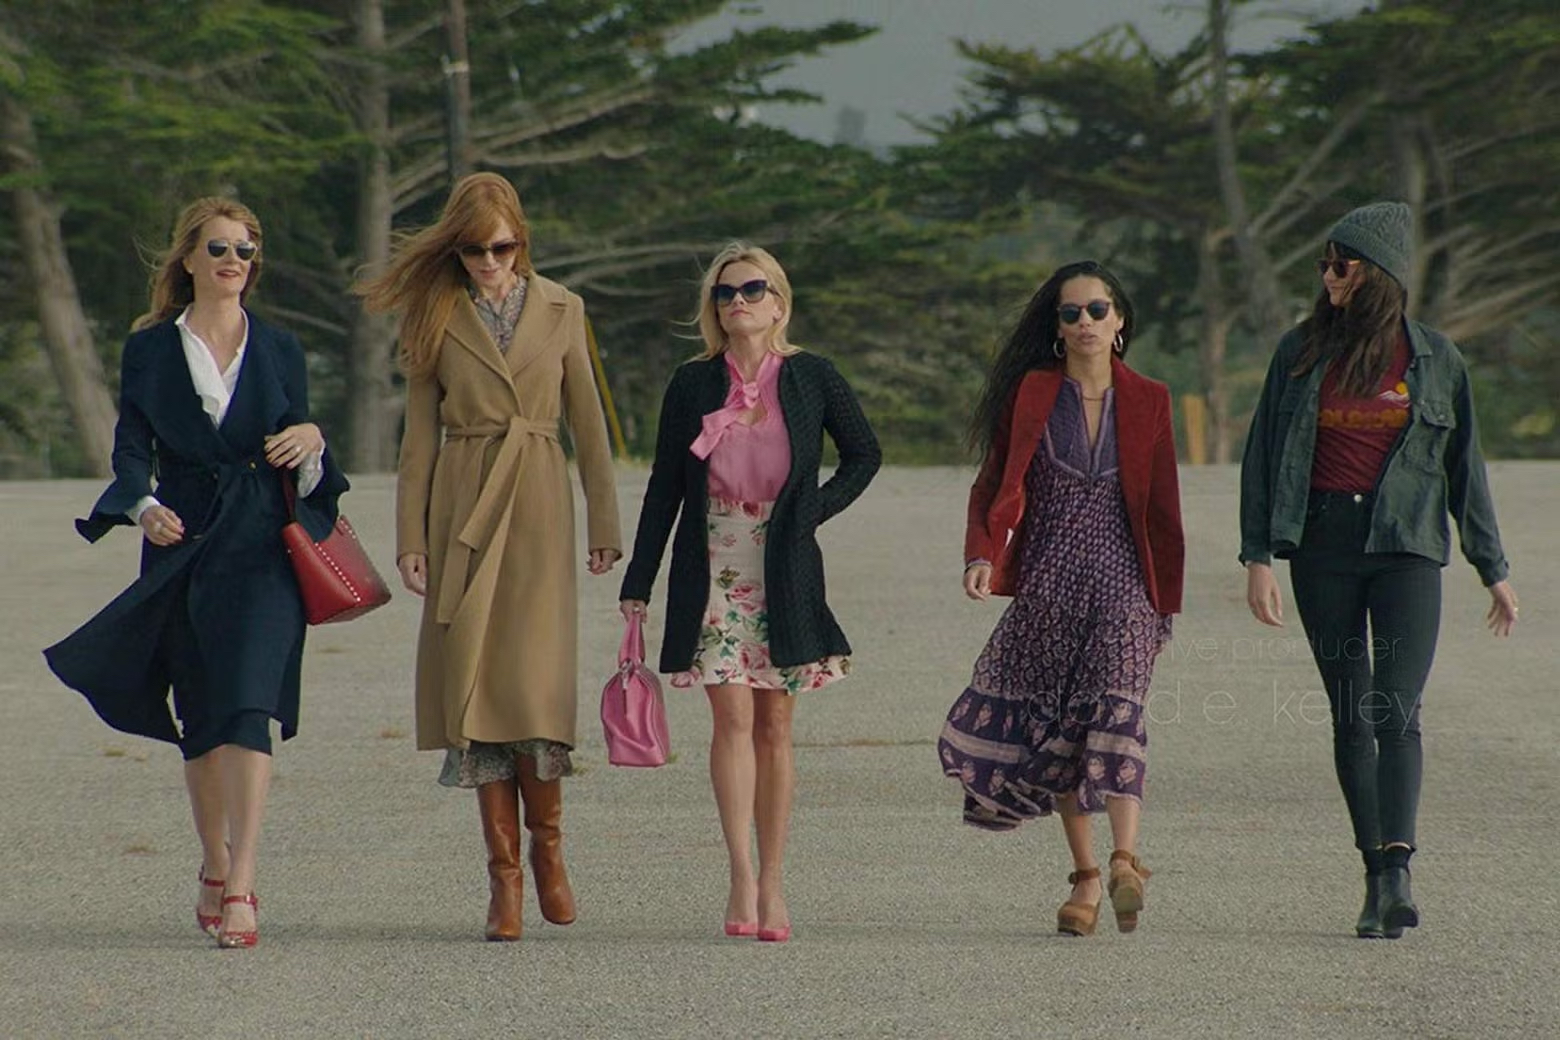 The group of women walking together in a scene from the show